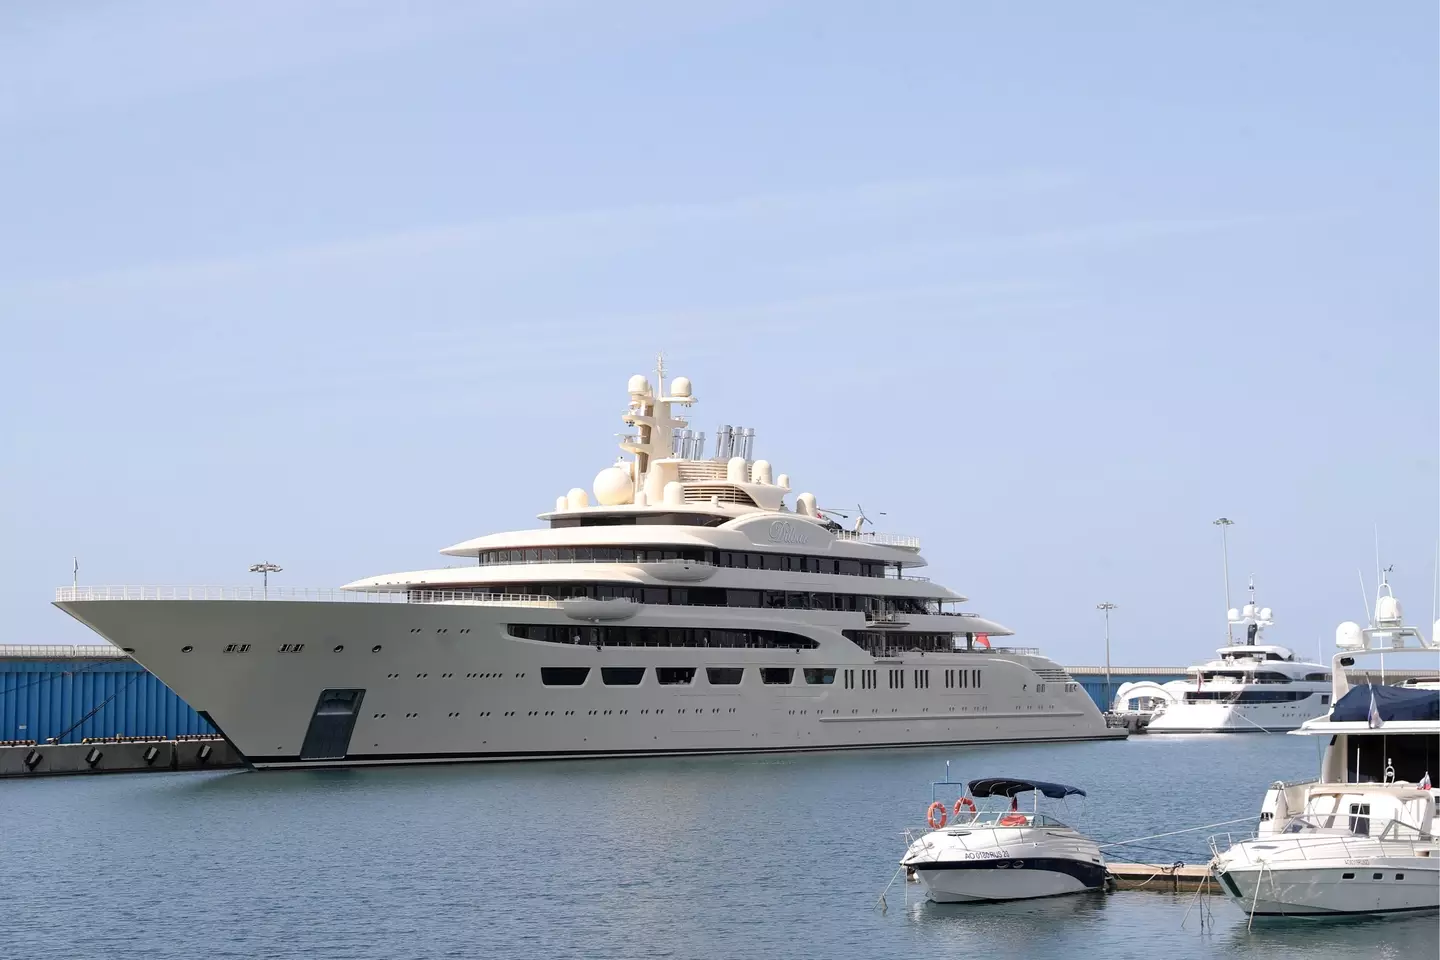 The Dilbar has been seized by German authorities.